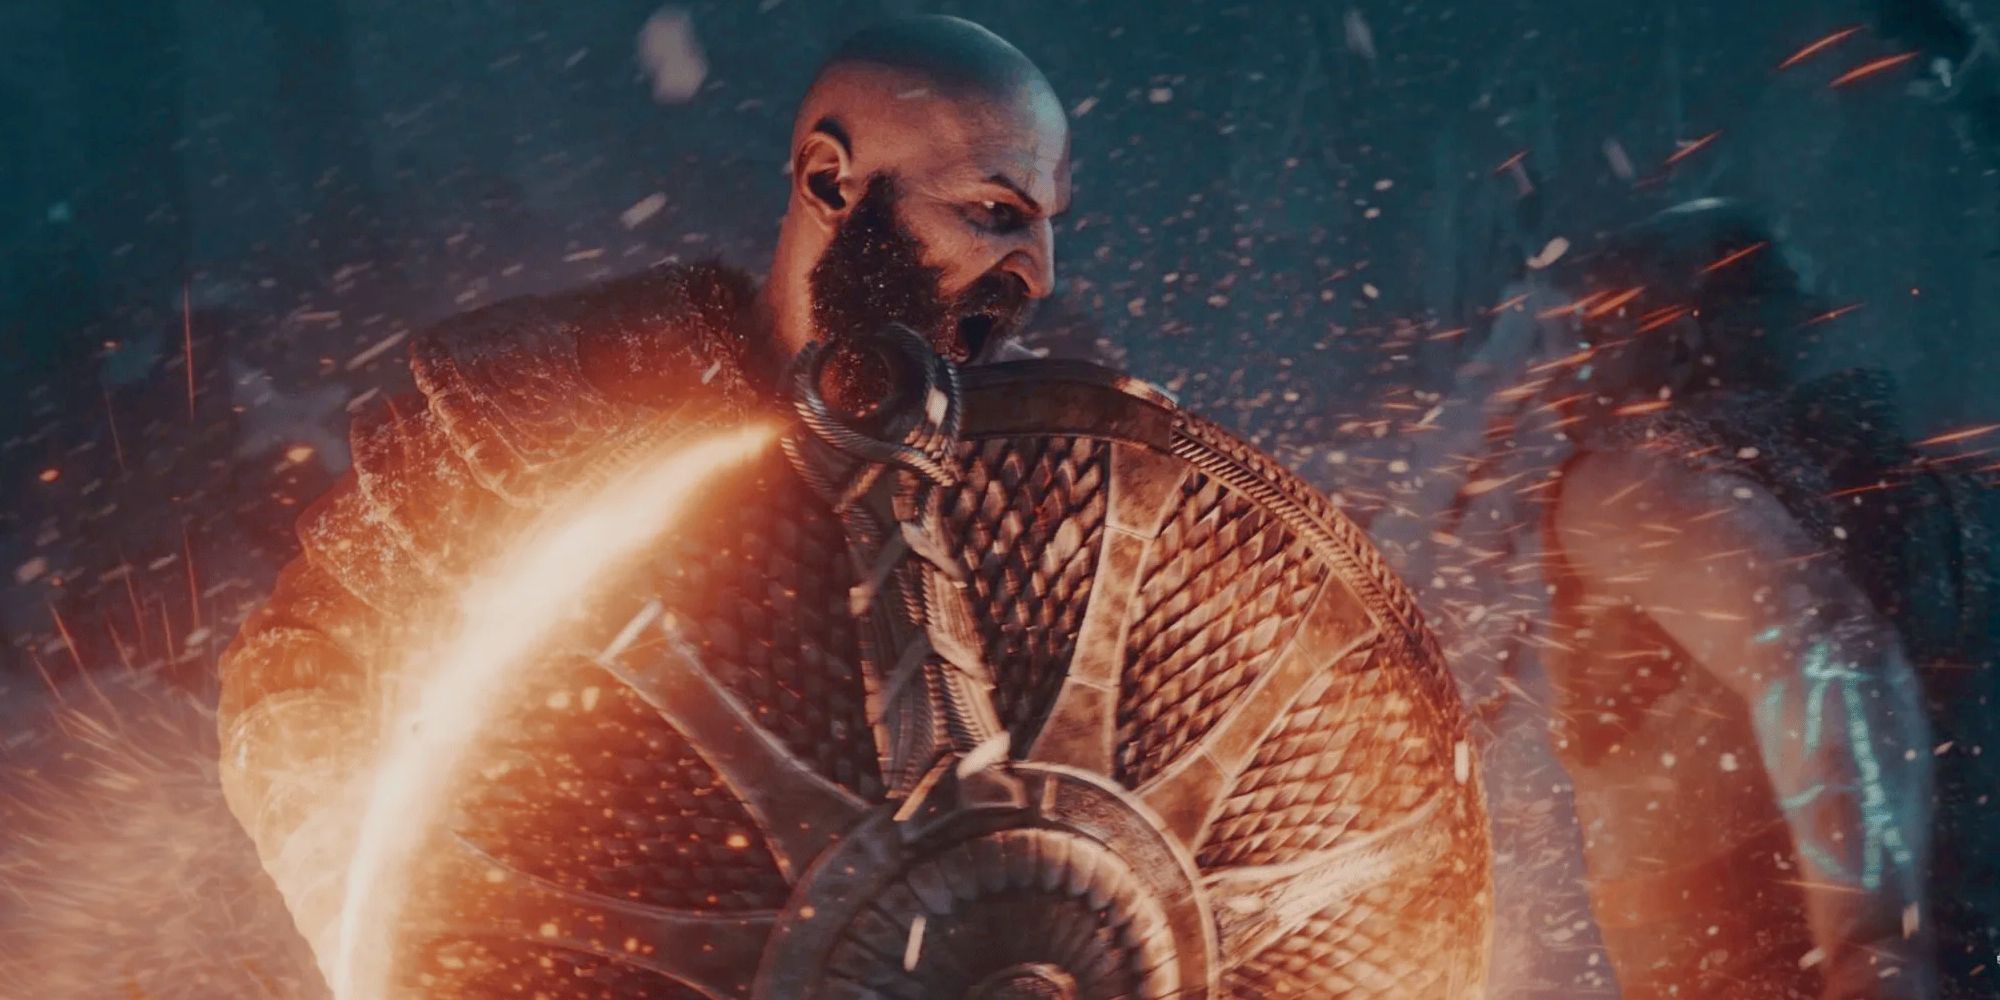 An open mouthed and bearded Kratos is seen holding a glowing shield that is shooting sparks out of it's sides while an enemy approaches him.